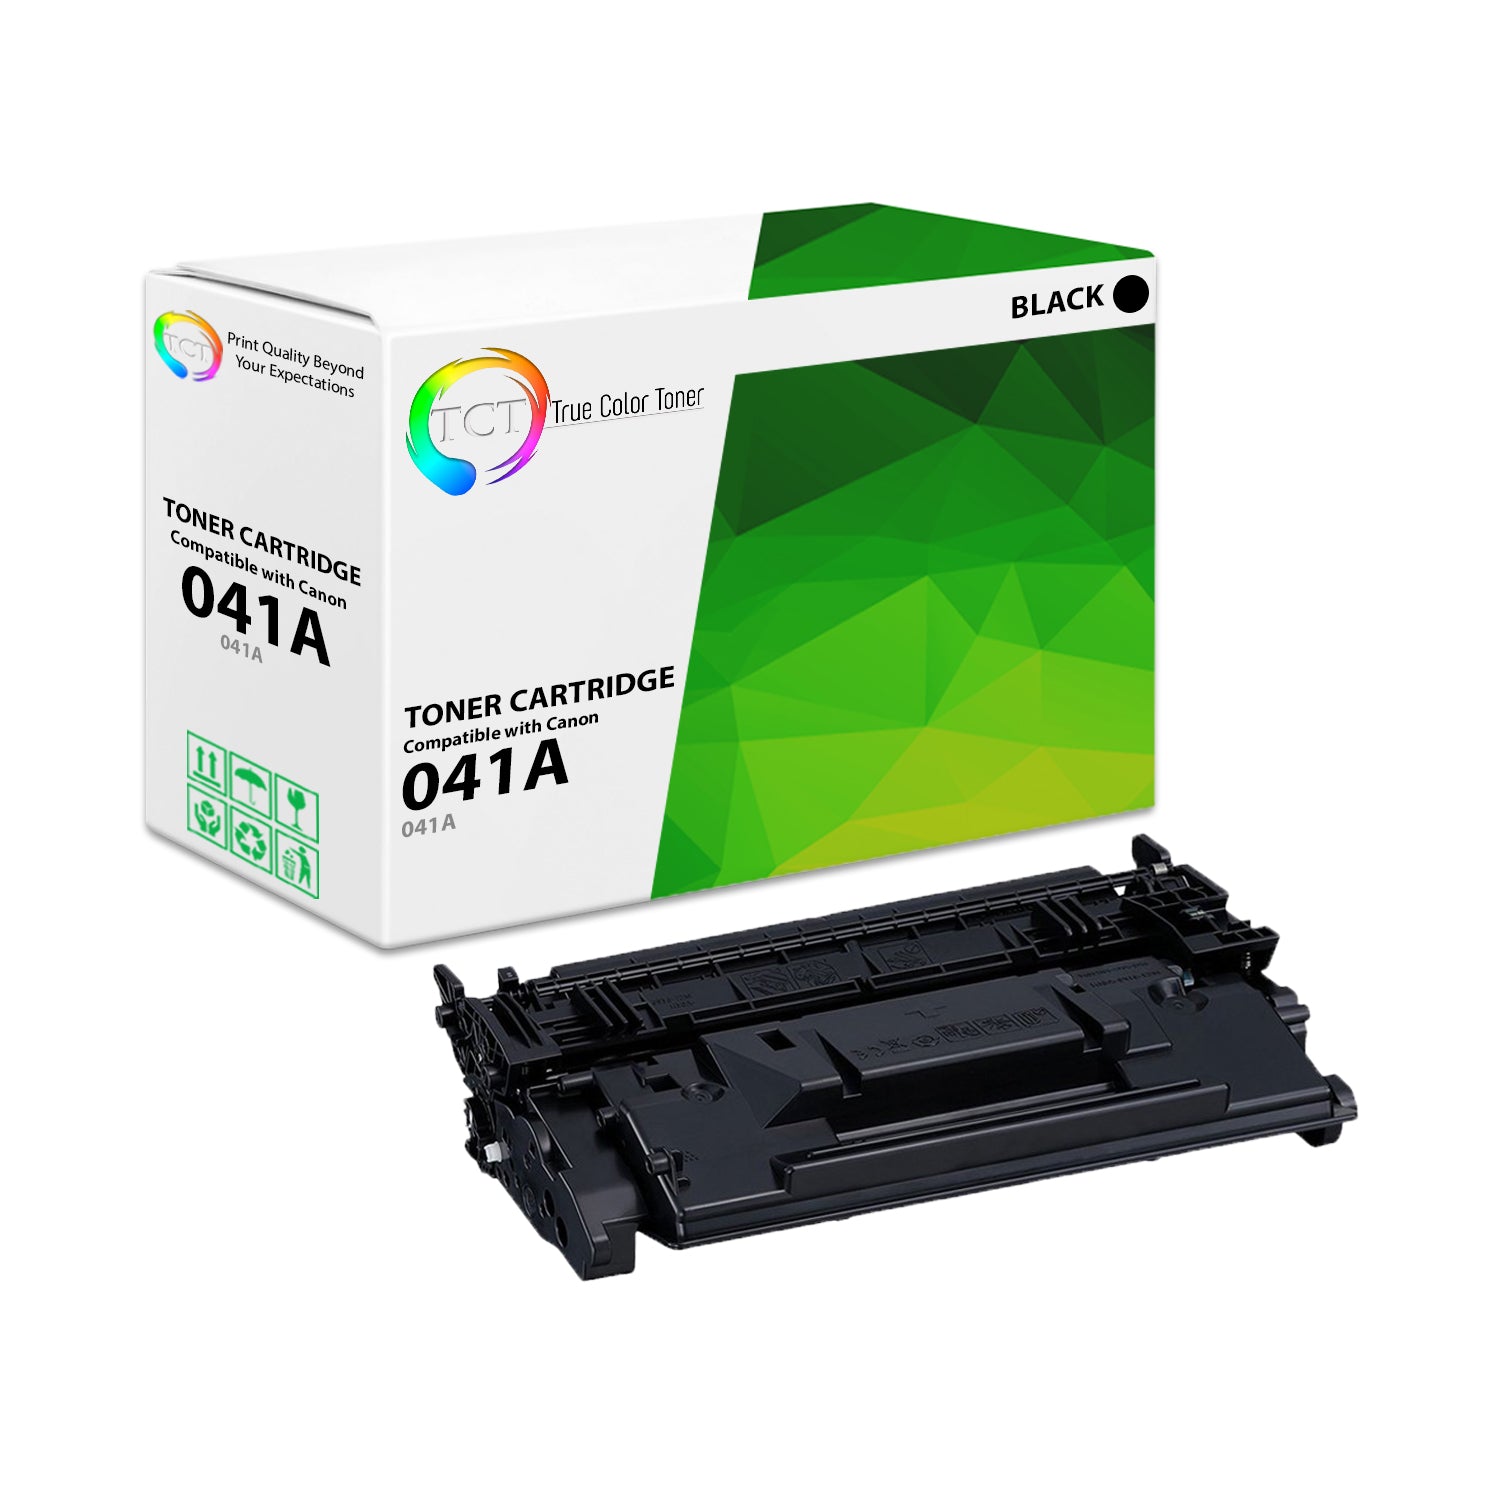 TCT Compatible Toner Cartridge Replacement for the Canon 041 Series - 1 Pack Black